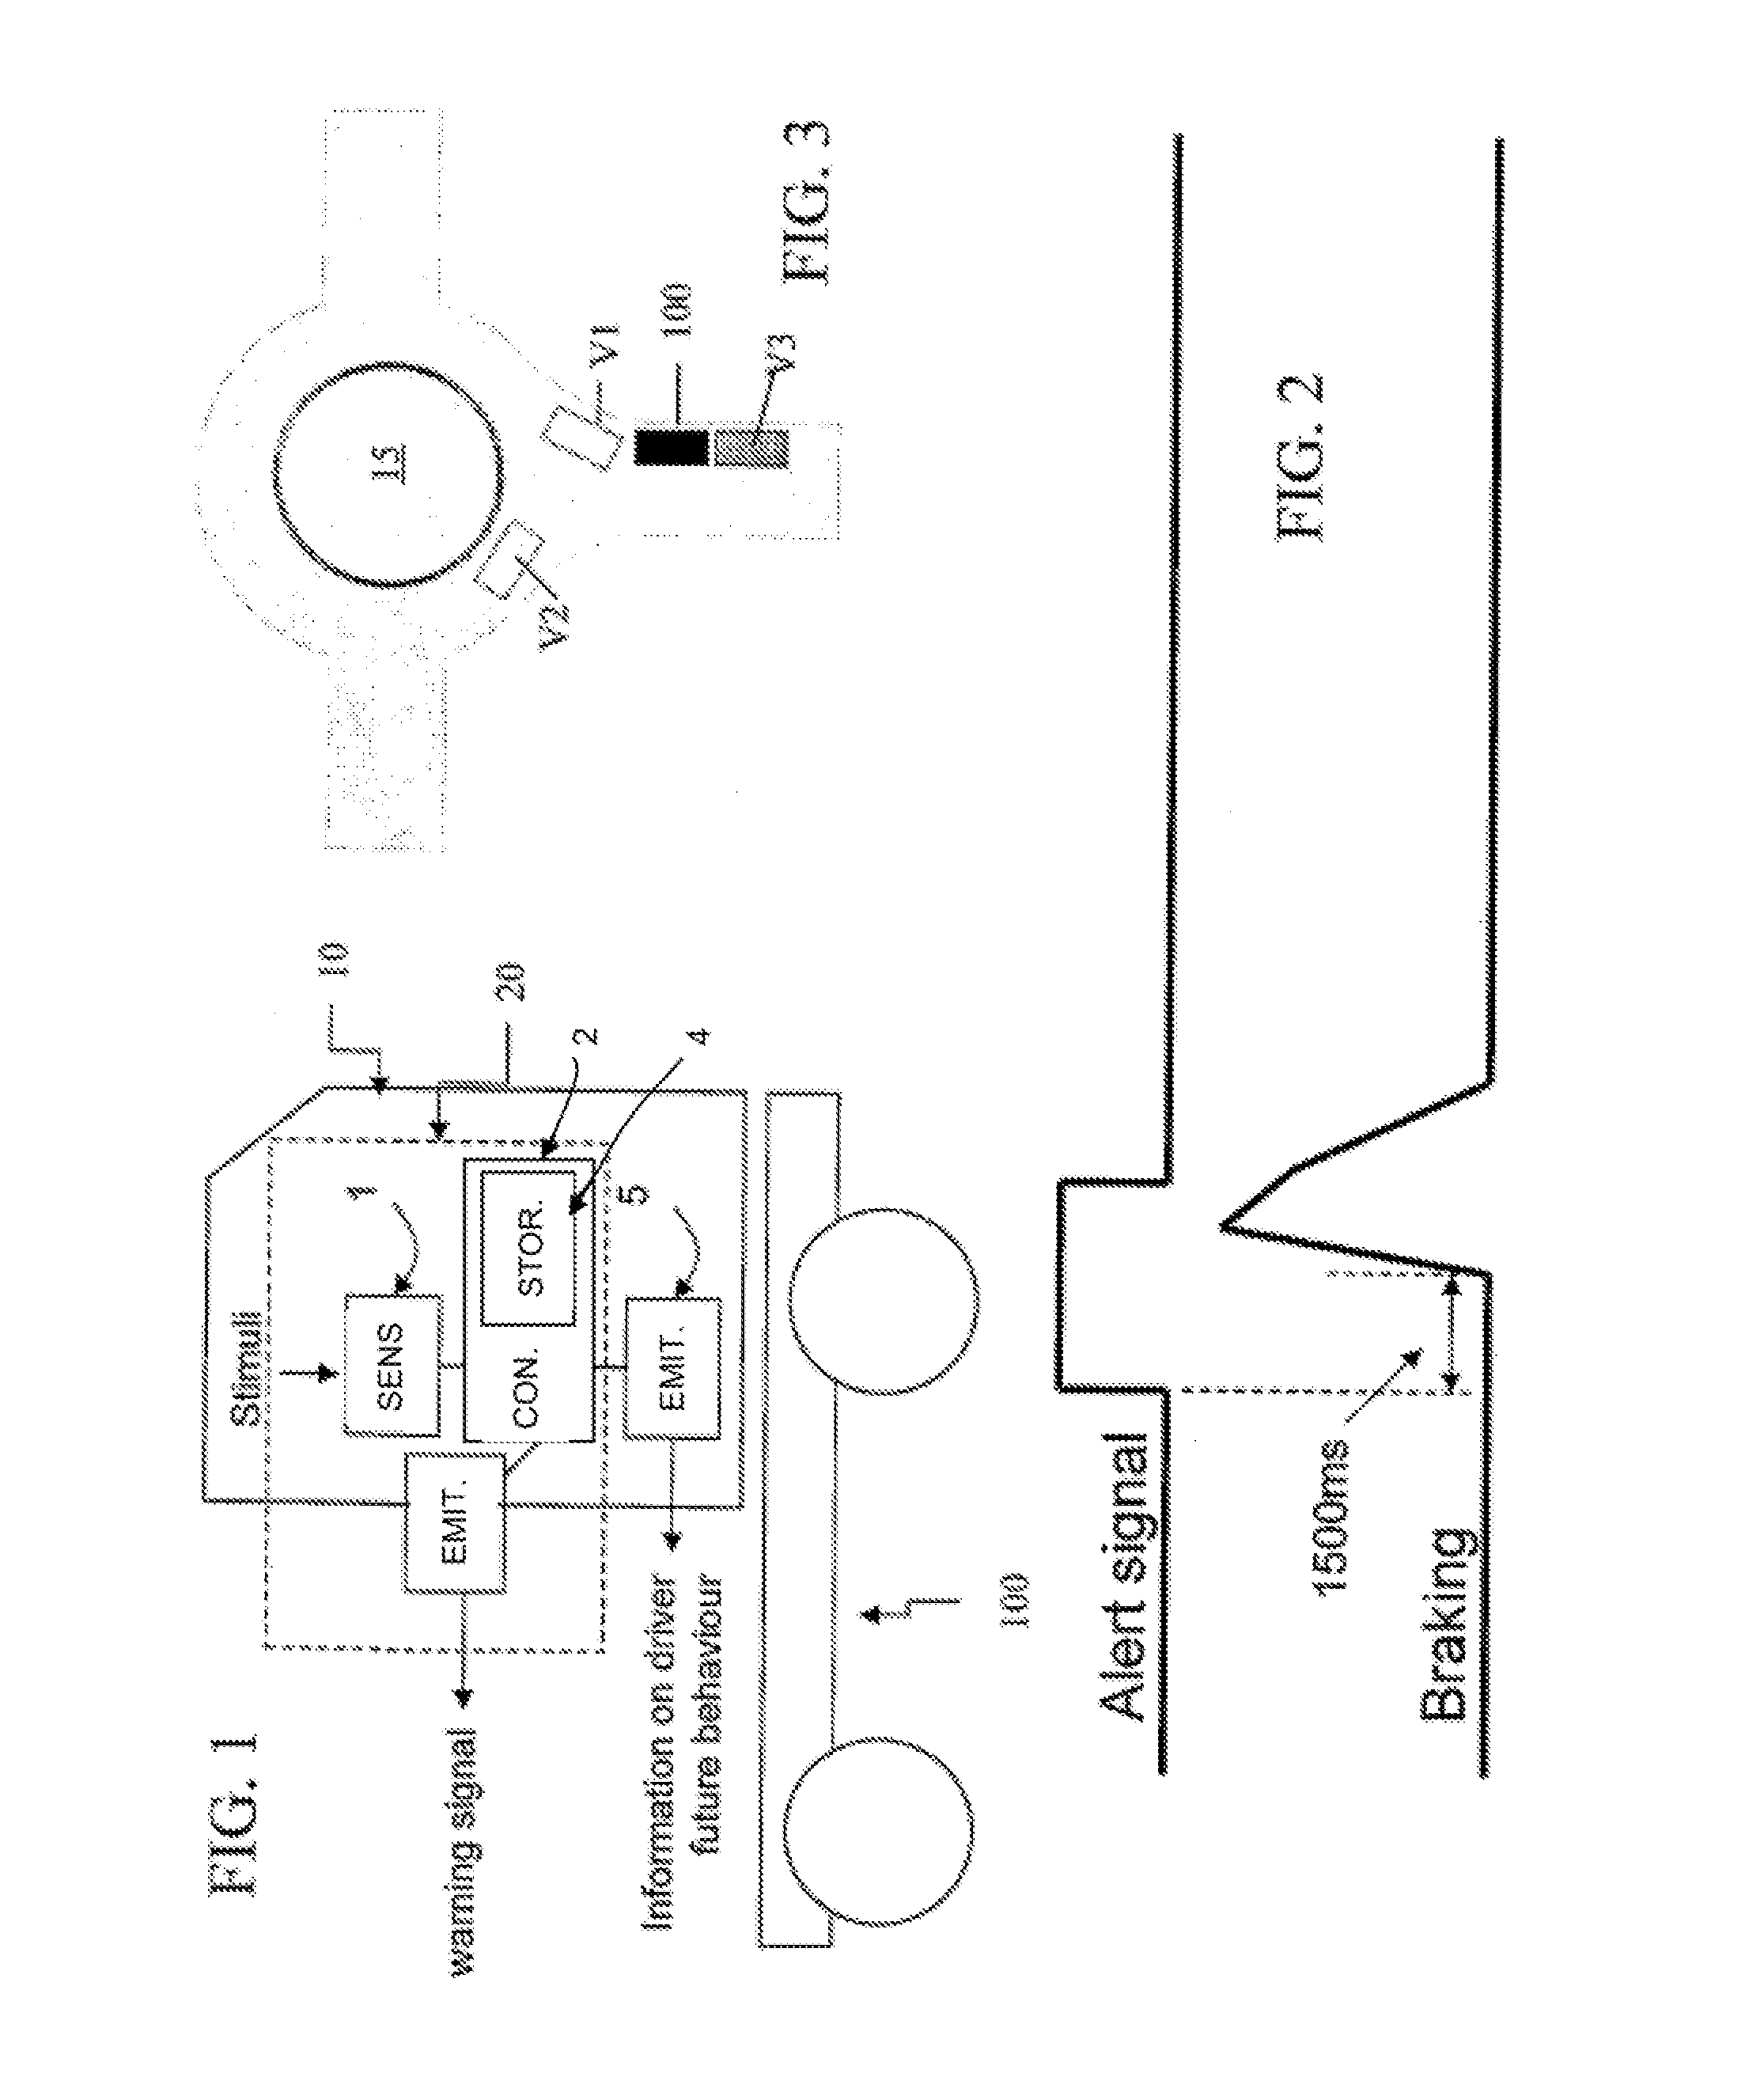 Method and system to enhance traffic safety and efficiency for vehicles including calculating the expected future driver'S behavior